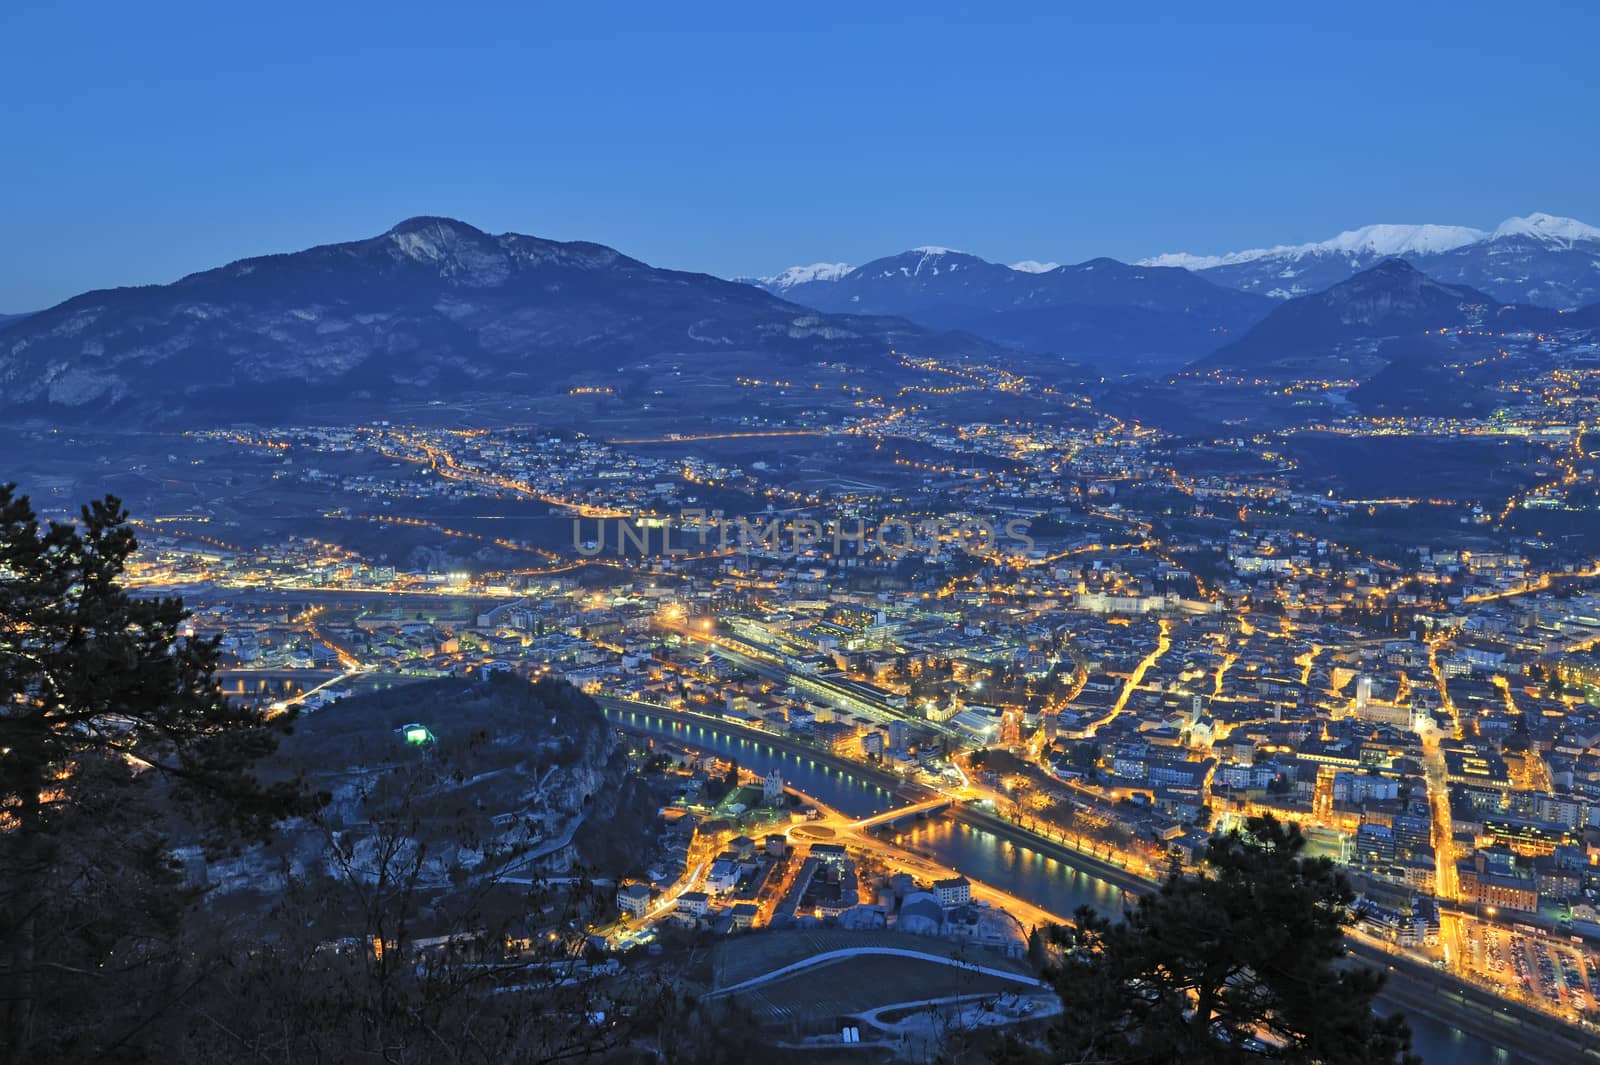 Overview of Trento in night time  by mady70